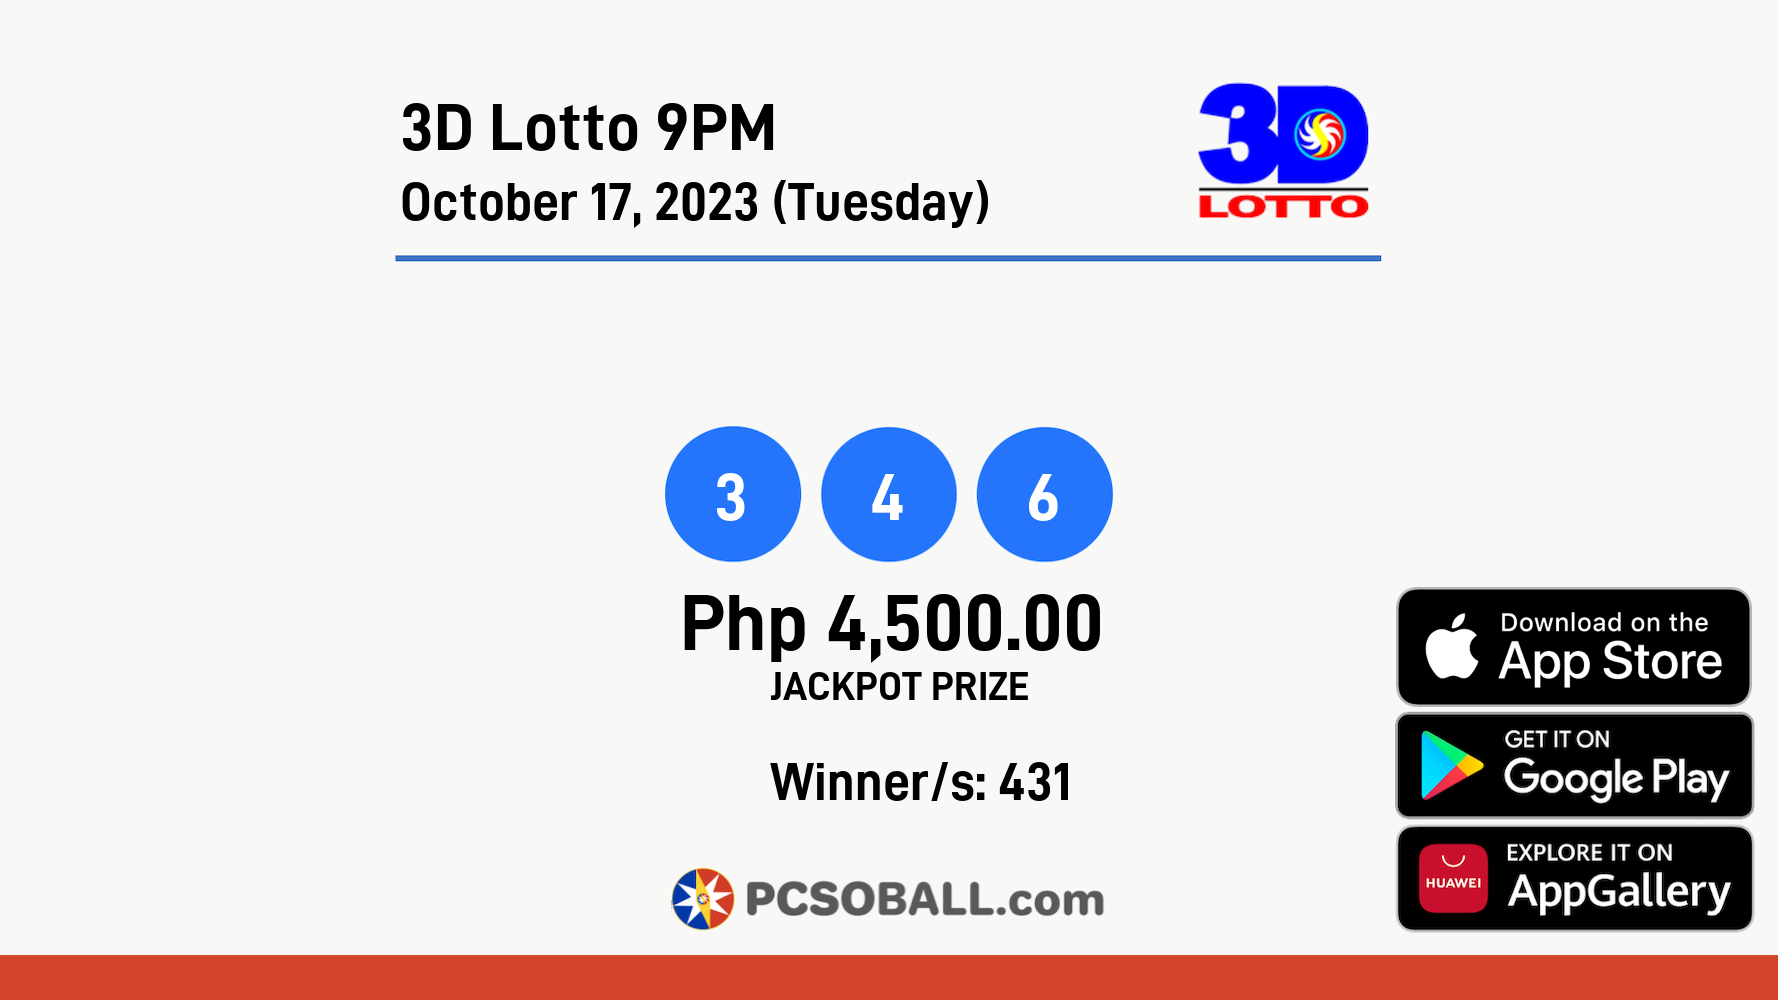 3D Lotto 9PM October 17, 2023 (Tuesday) Result